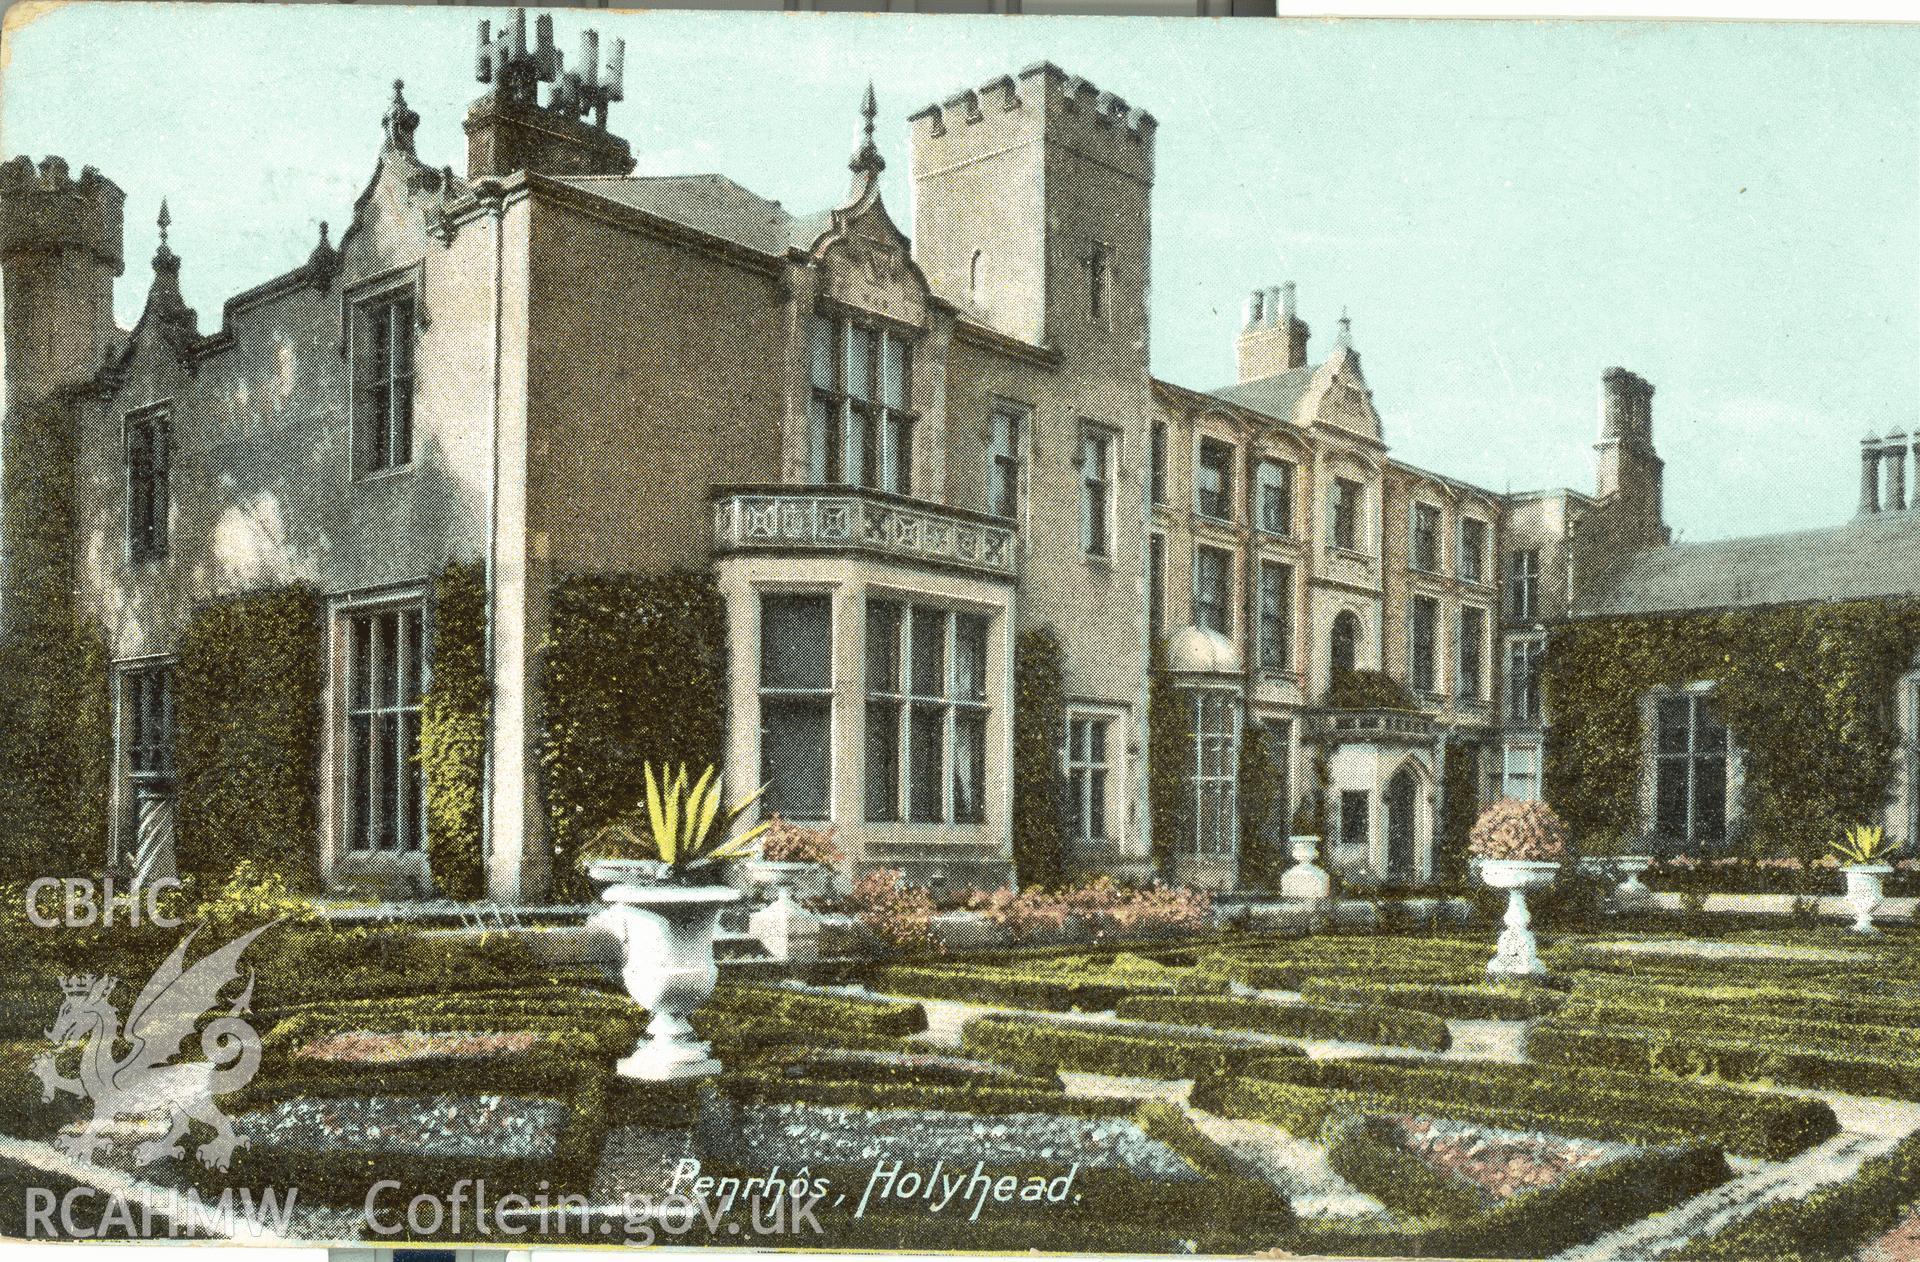 Digitised postcard image of Penrhos, Holyhead, Williams, Boston House, Holyhead. Produced by Parks and Gardens Data Services, from an original item in the Peter Davis Collection at Parks and Gardens UK. We hold only web-resolution images of this collection, suitable for viewing on screen and for research purposes only. We do not hold the original images, or publication quality scans.